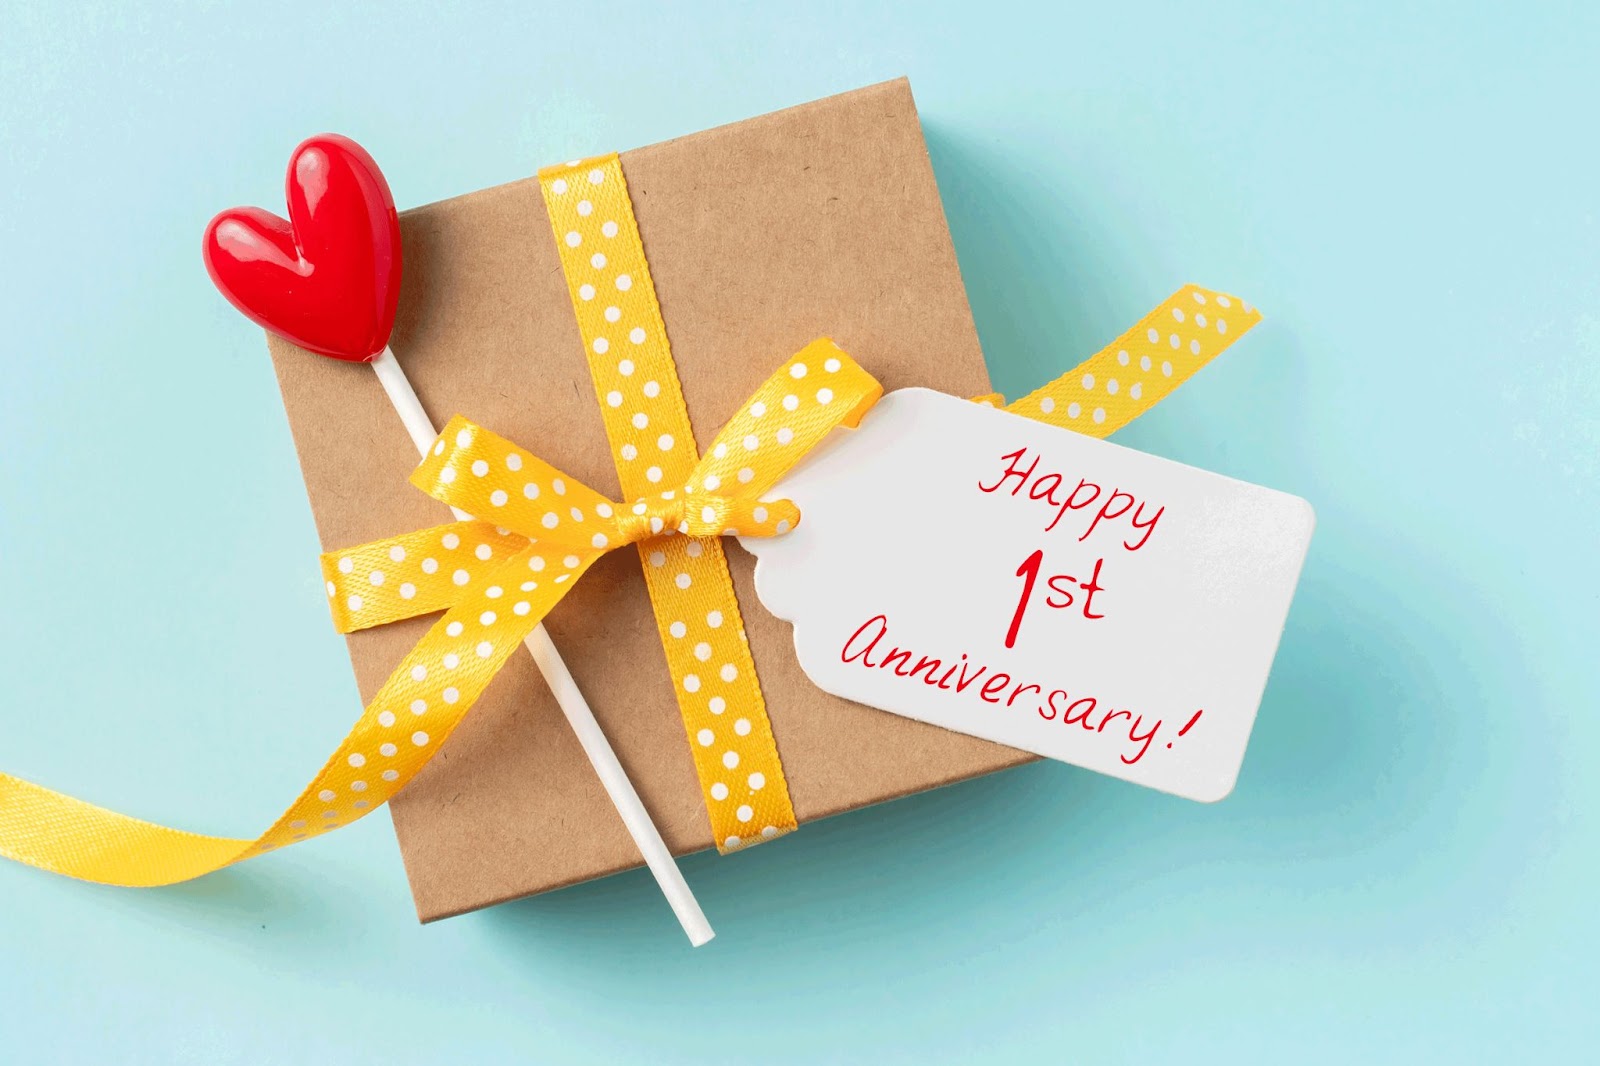 Creative Anniversary Gifts | Top Anniversary Gifts for Couples, Parents,  and Friends